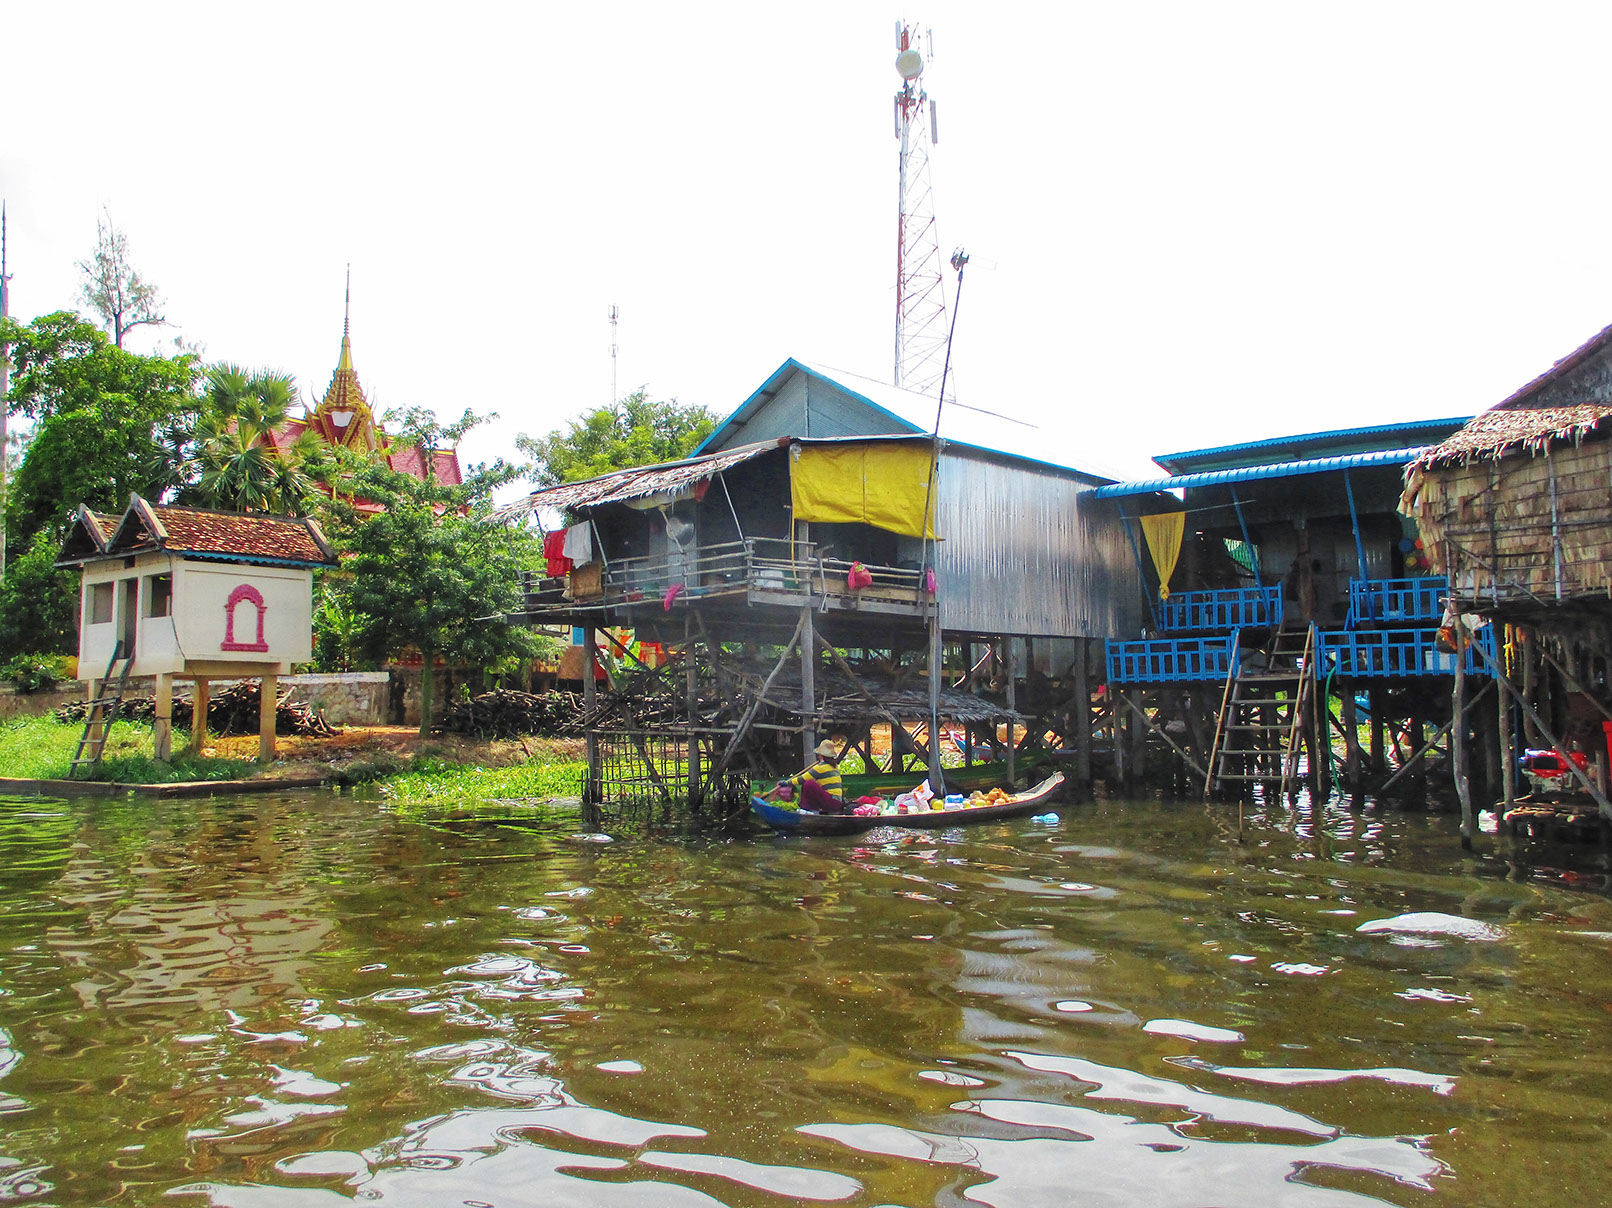 Floating village of Kampong Phluk has its own Pagoda